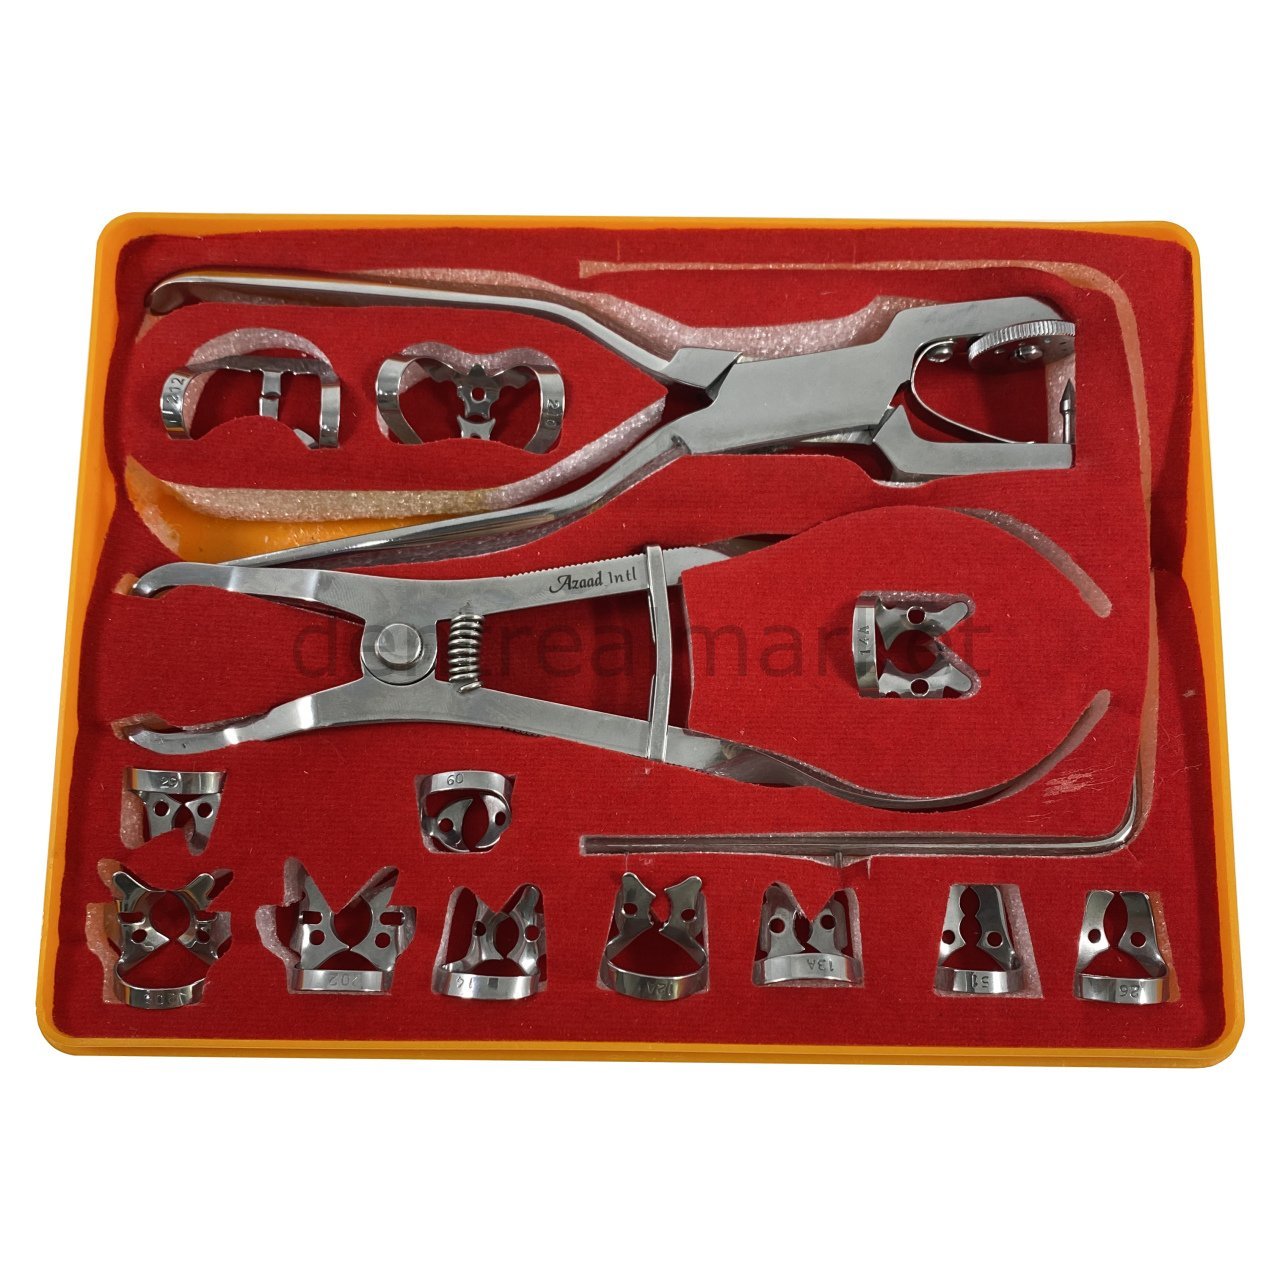 Drm Rubberdam Clamp and Tool Set + Rubberdam Template